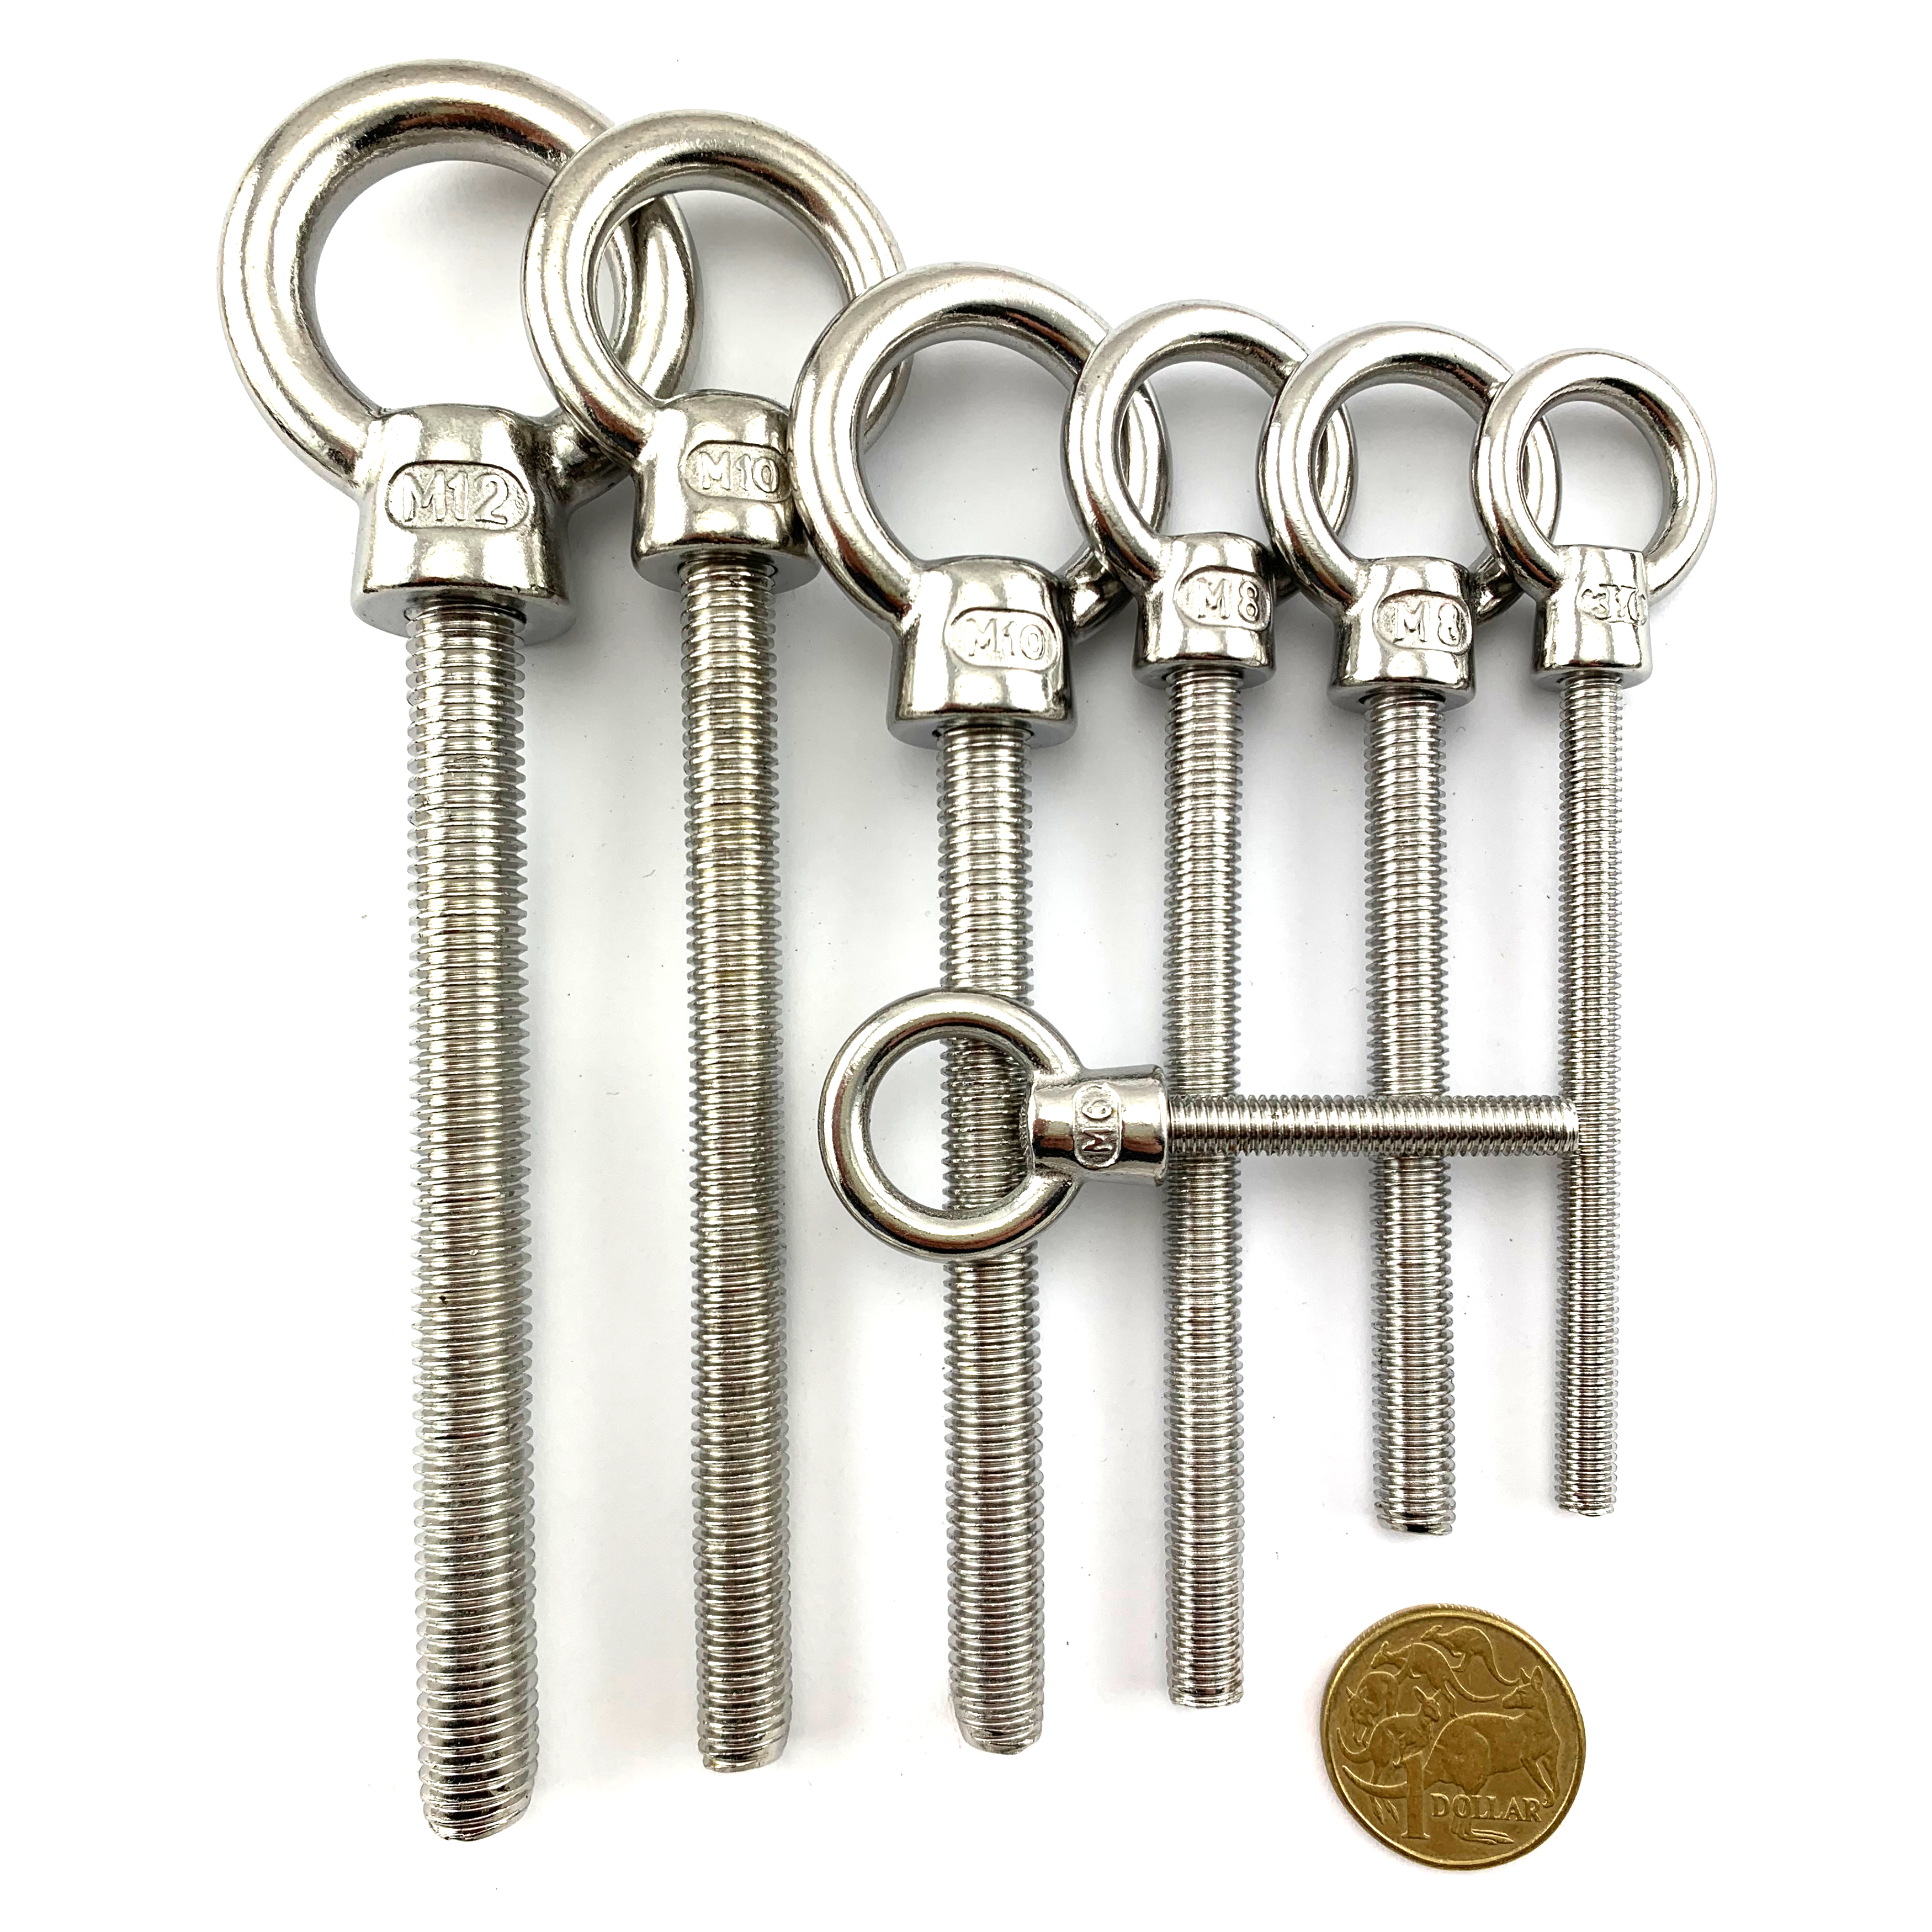 Lifting Eye Bolts In Stainless Steel Various Sizes Australia Wide